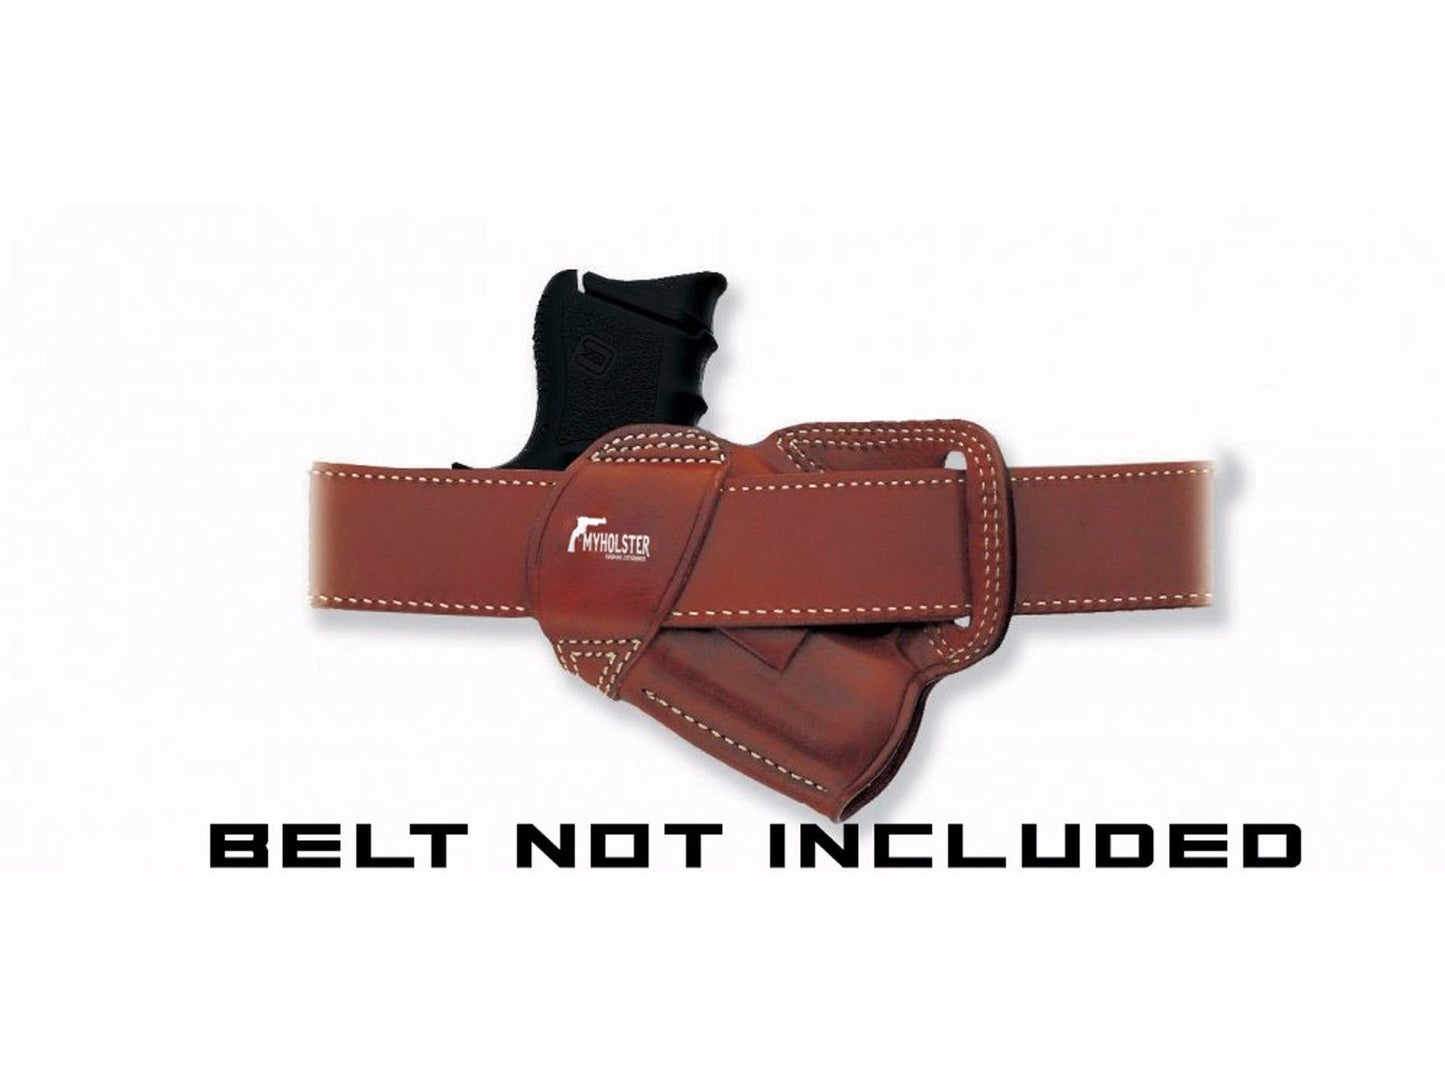 SOB Small Of Back Holster for 1911 5-Inch Colt, Kimber, Para, Springfield - Choose Your Color & Hand